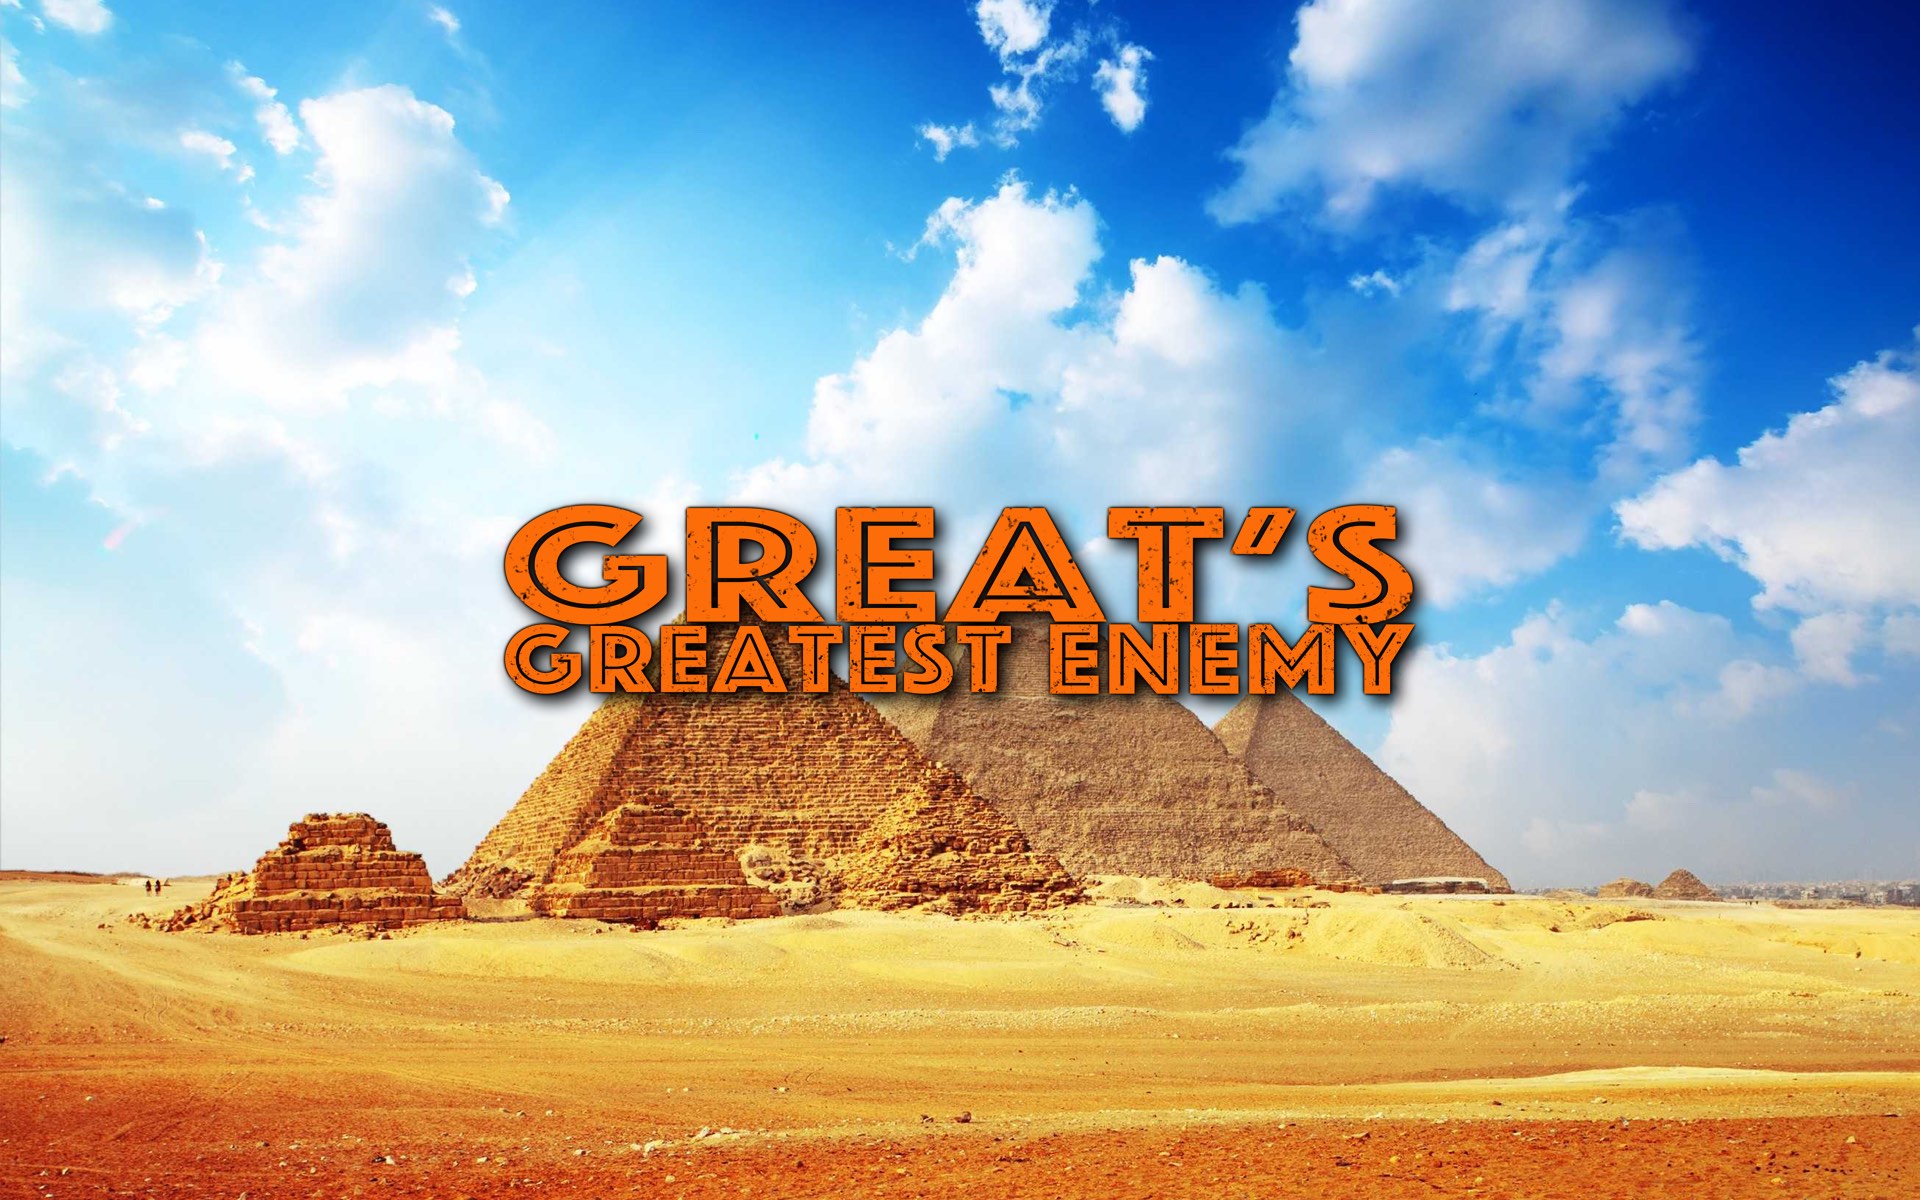 The Greatest Enemy of Great